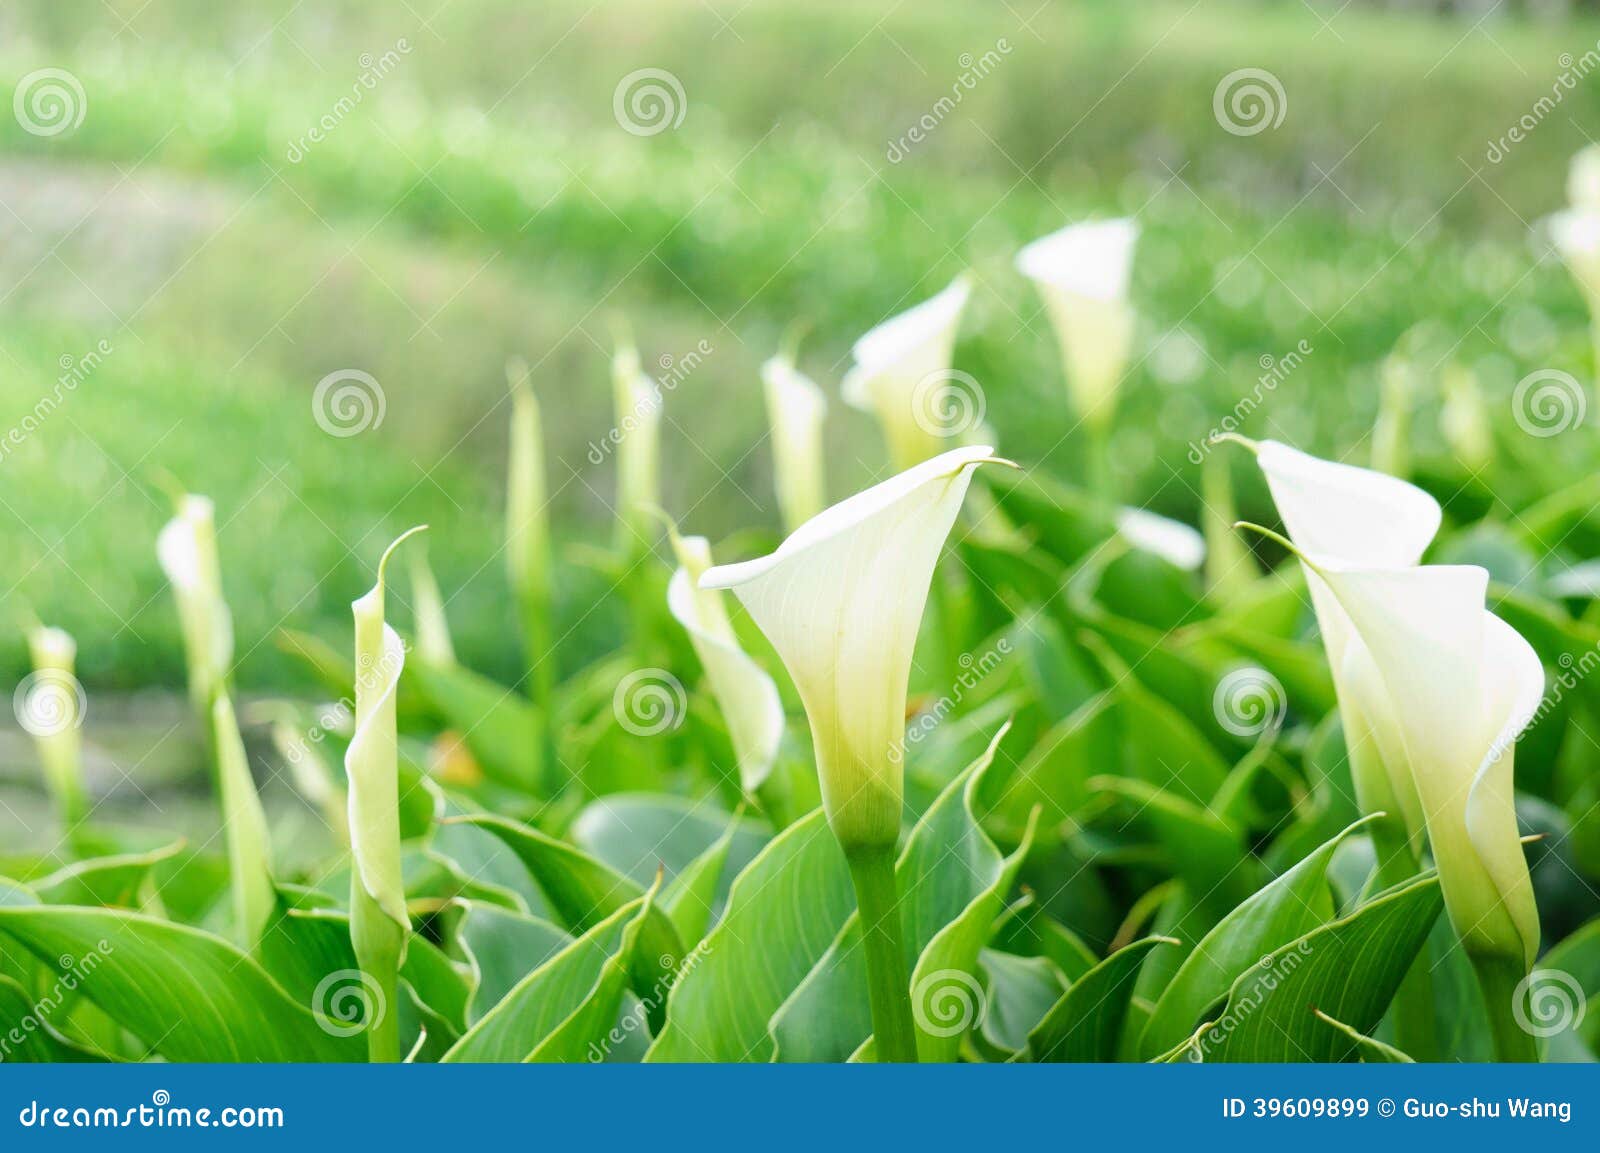 Calla Lily farm stock image. Image of lily, flower, solitude - 39609899